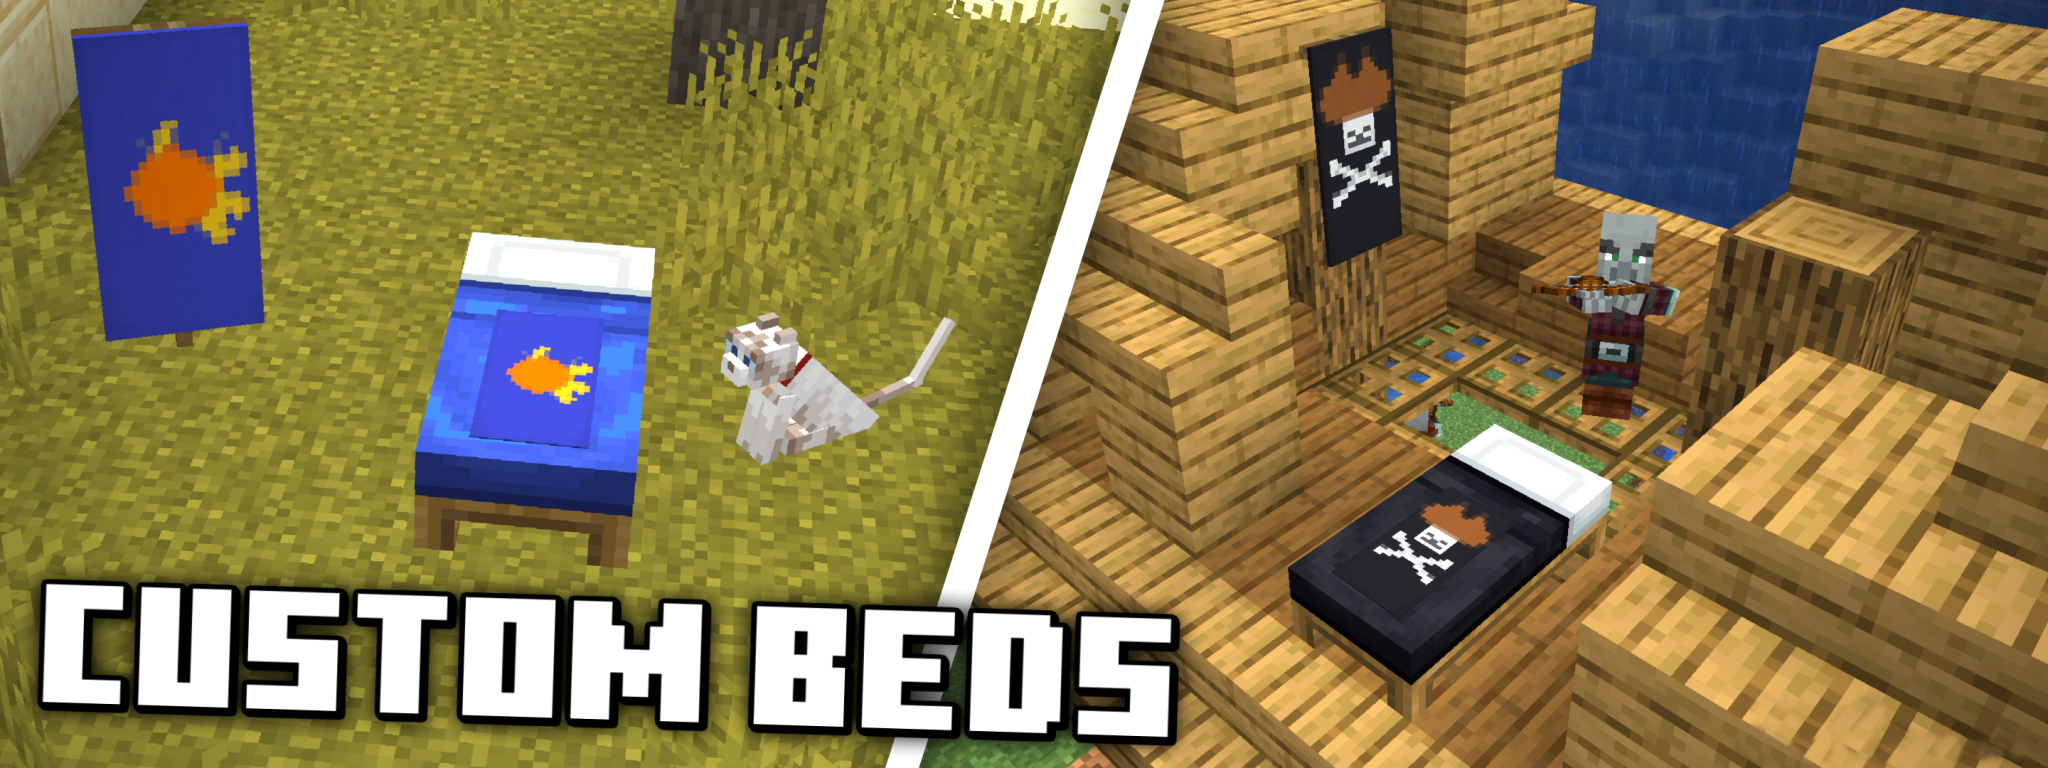 WL Custom Beds - Custom bed patterns using banners! Minecraft Data Pack